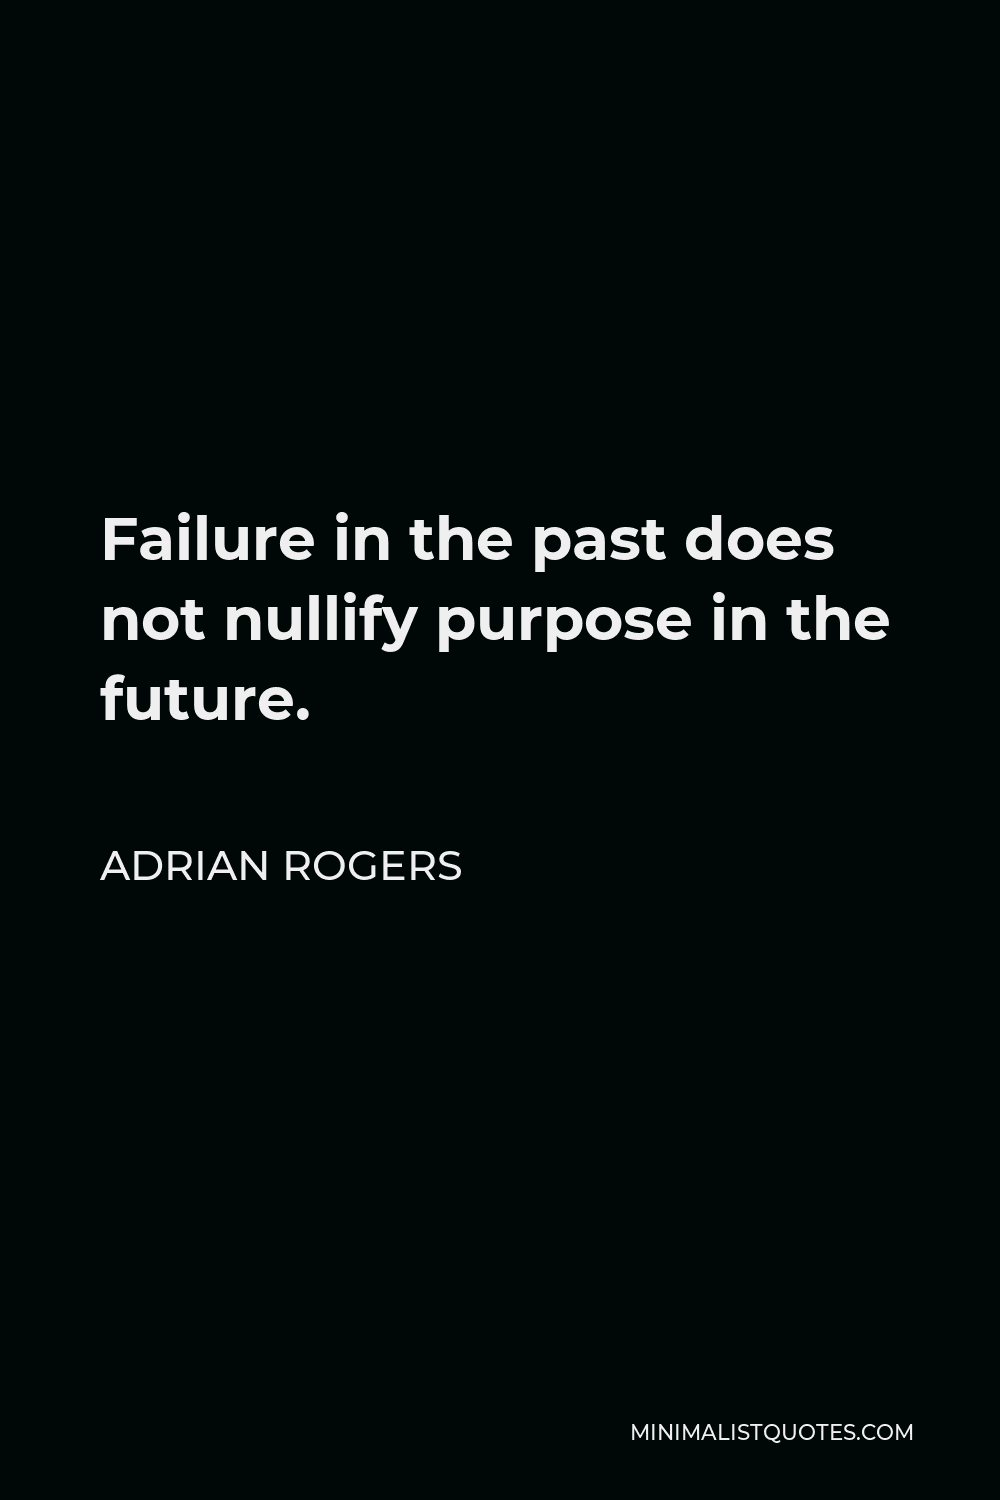 Adrian Rogers Quote - Failure in the past does not nullify purpose in the future.